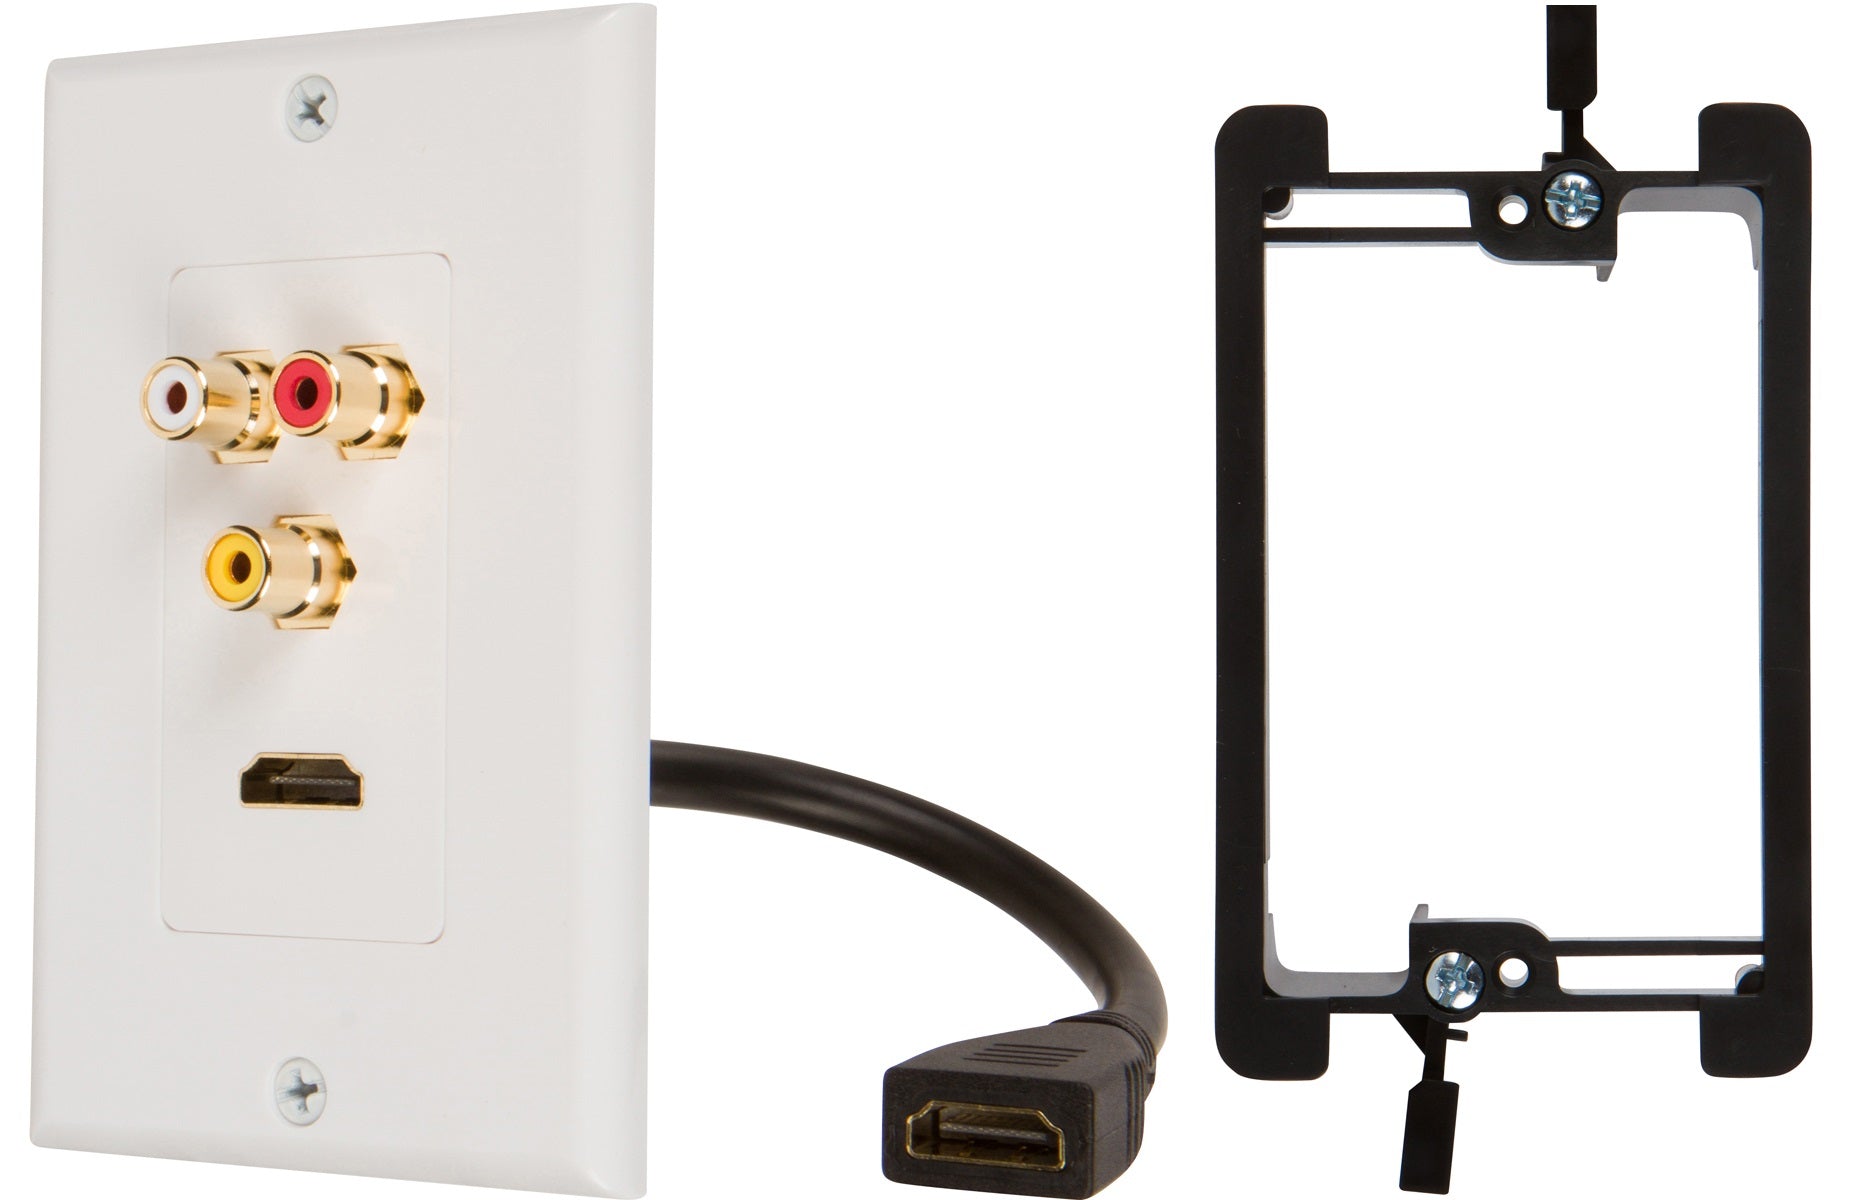 Buyer’s Point HDMI Pigtail RCA Wall Plate - Milena International Inc